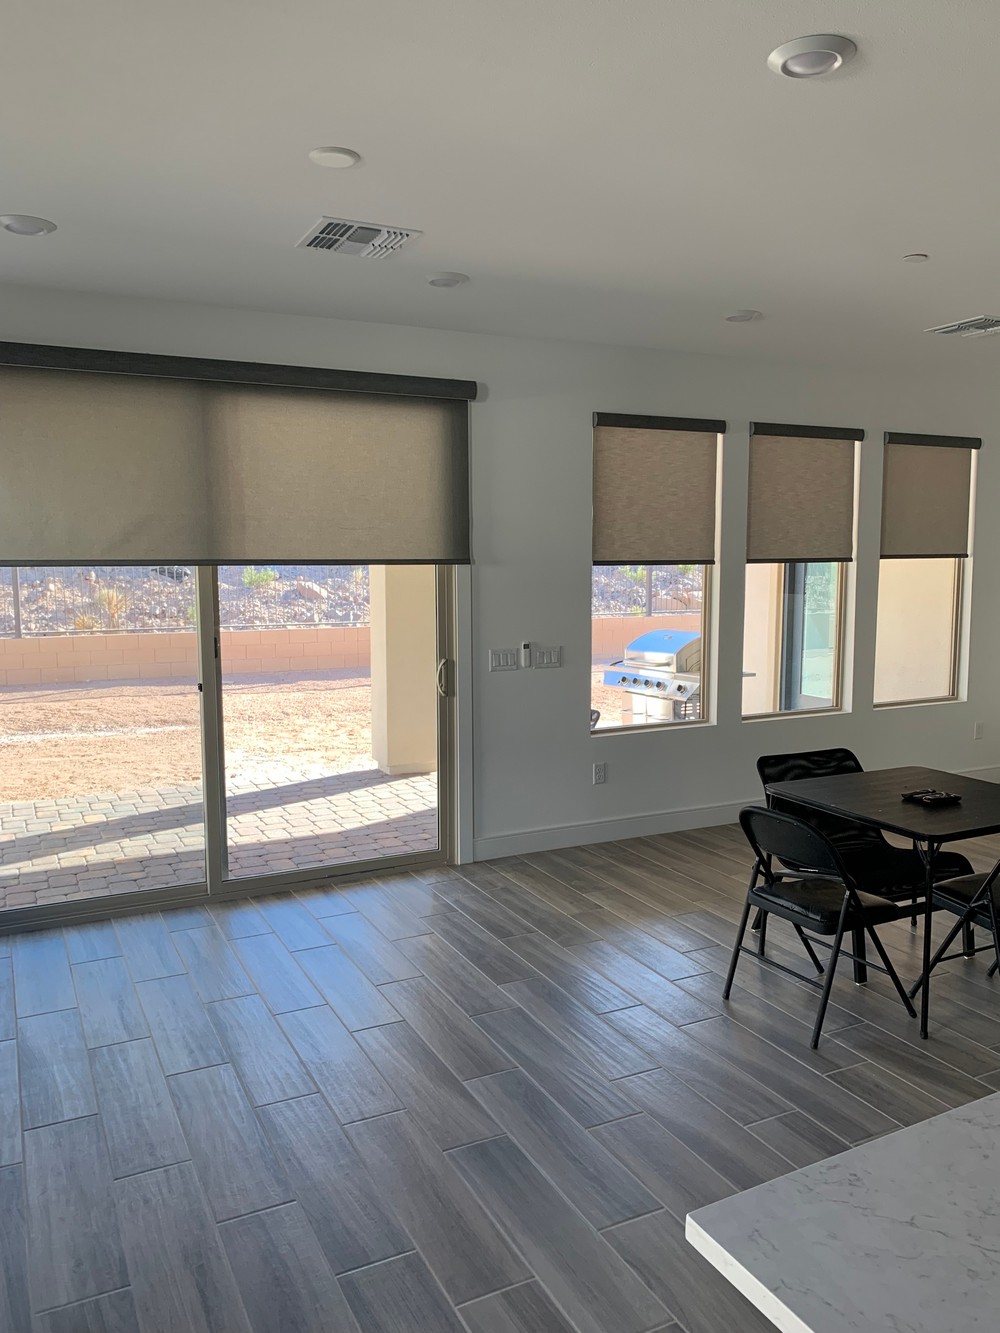 Roller Shades Motorized and Non-motorized at Sun Mirage Del Webb in Lake Las Vegas, NV